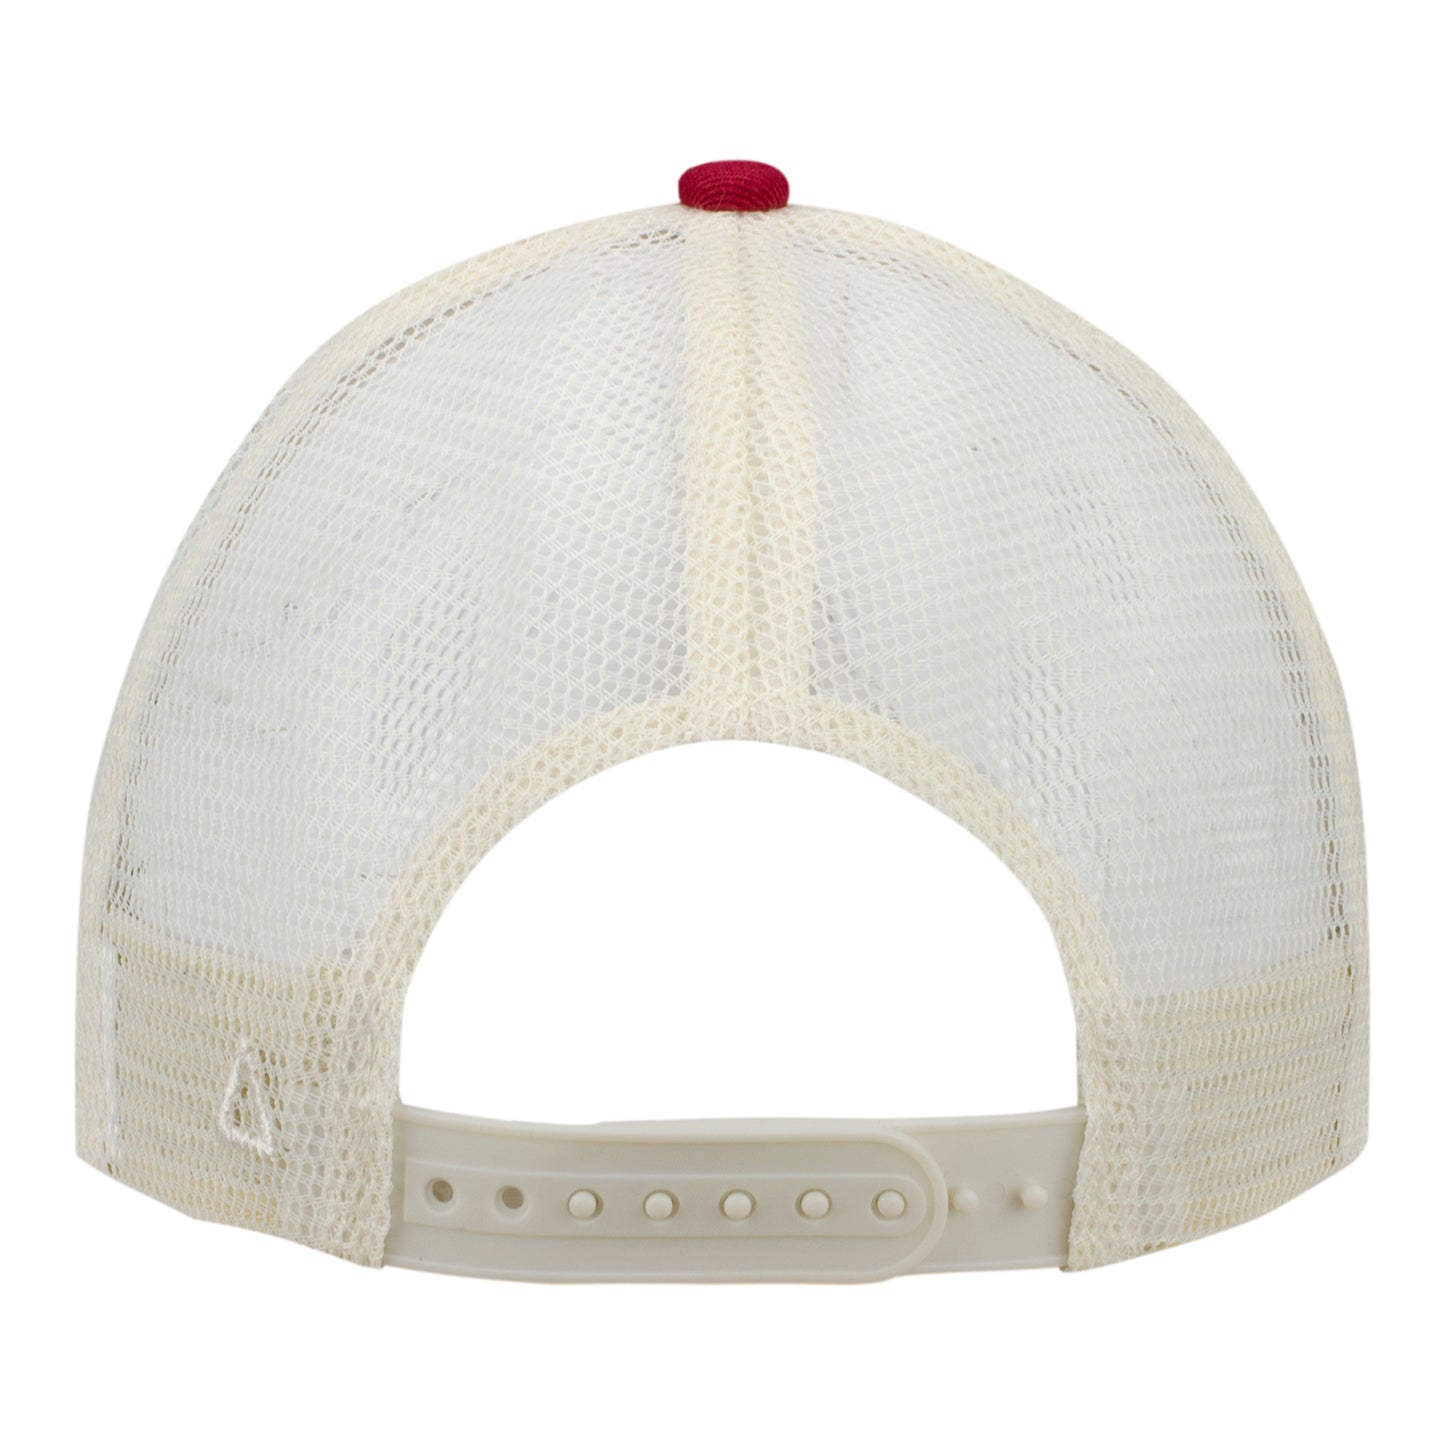 Ahead PGA HOPE Classic-Fit Structured Meshback Hat in Red & White - Back View